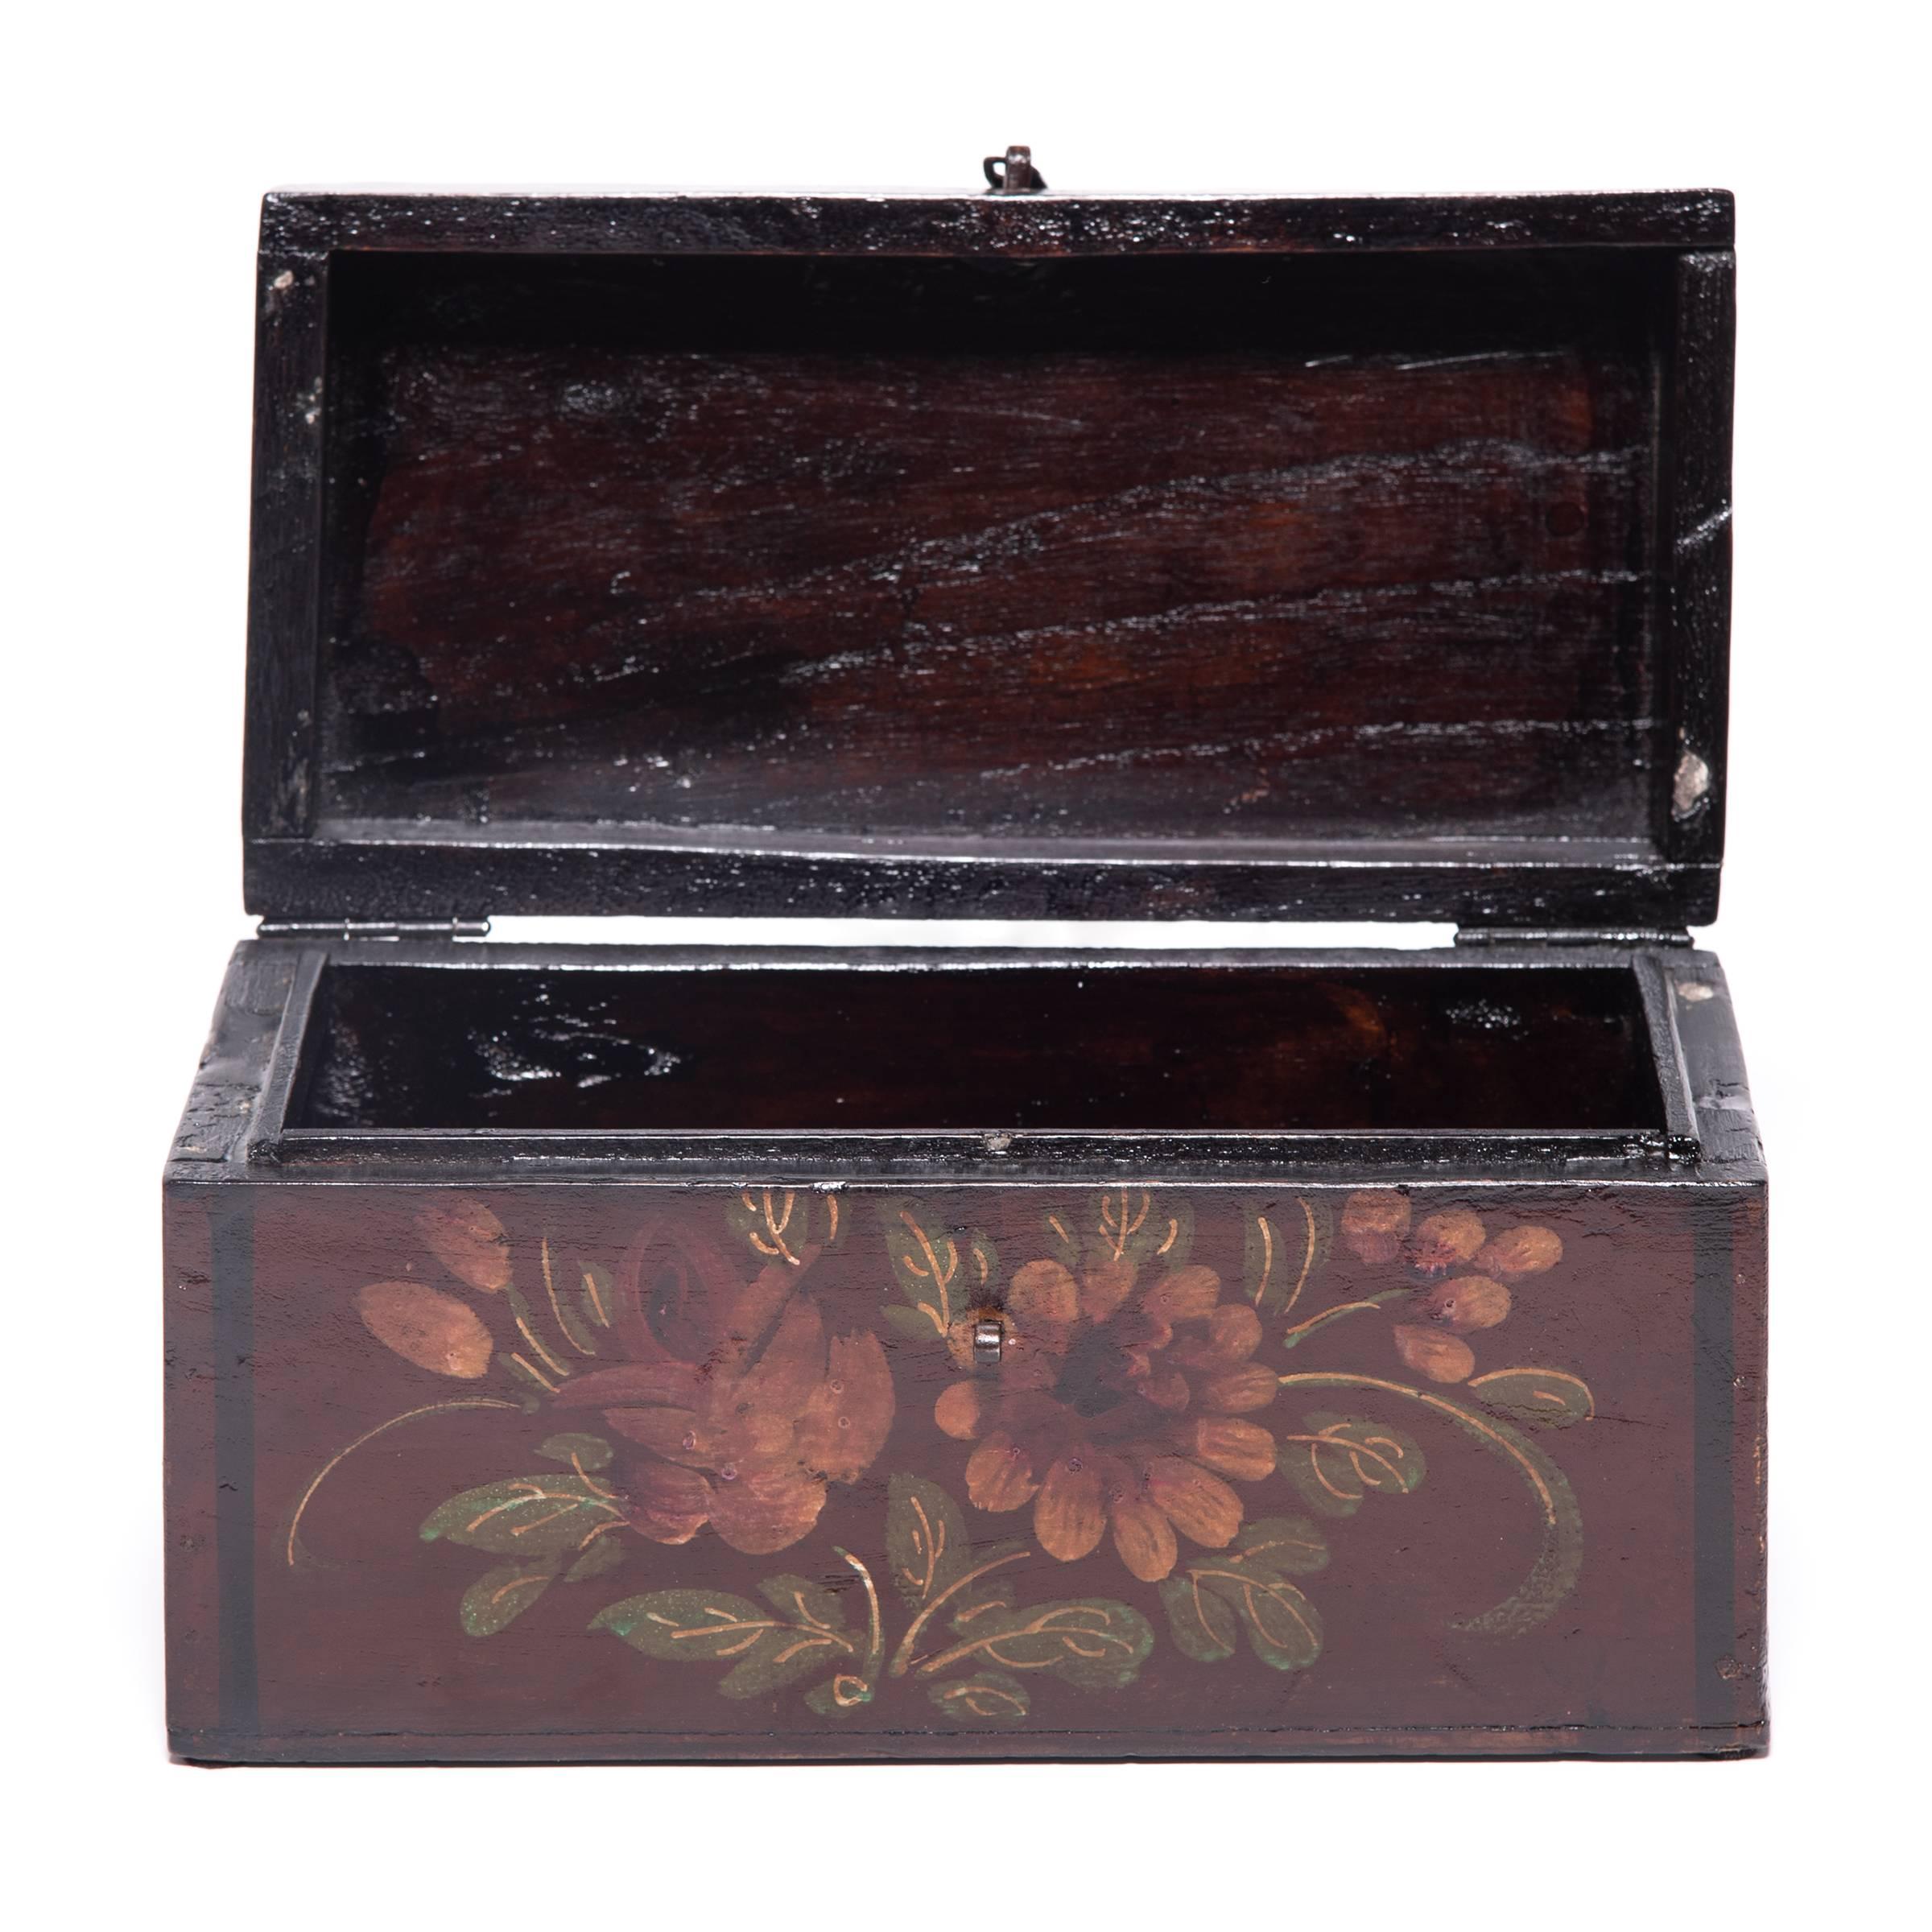 Made of humble pine, this simple box was transformed by coats of rich lacquer and decorative painted motifs to become a fitting container for treasured objects. Crafted circa 1900, this treasure box is adorned with a bouquet of peonies, a sign of